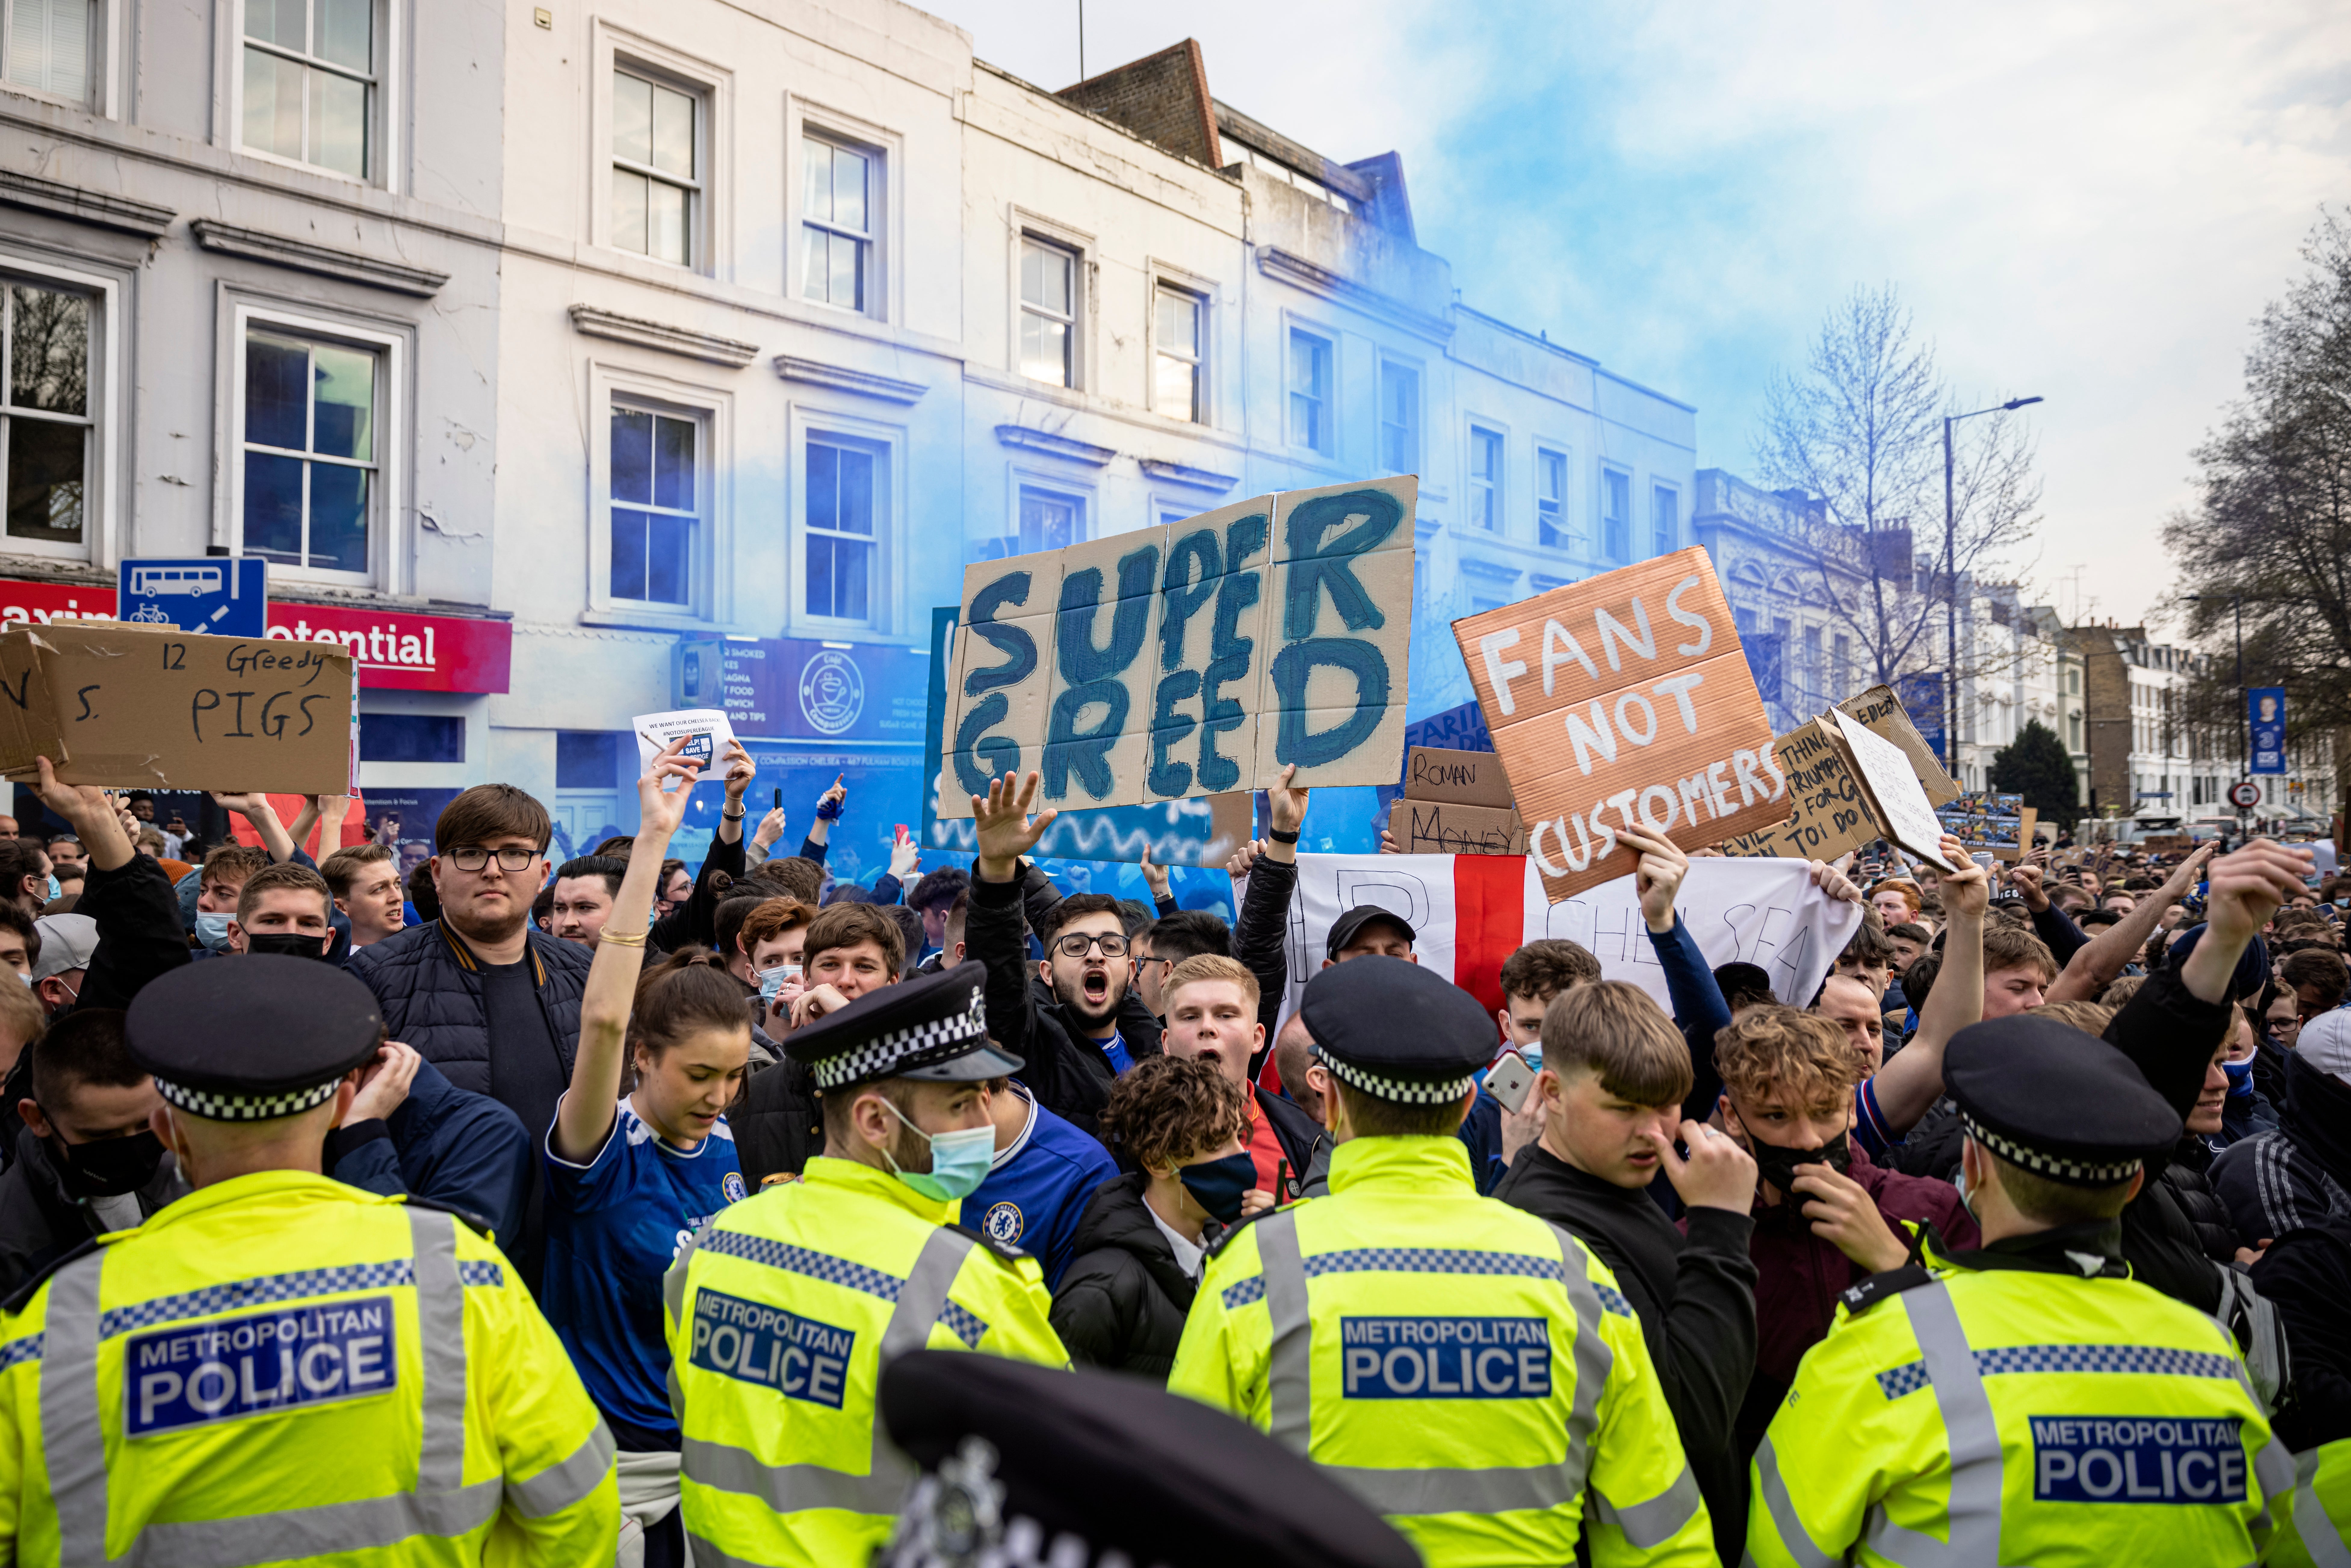 Chelsea supporters protested their club’s involvement in the Super League